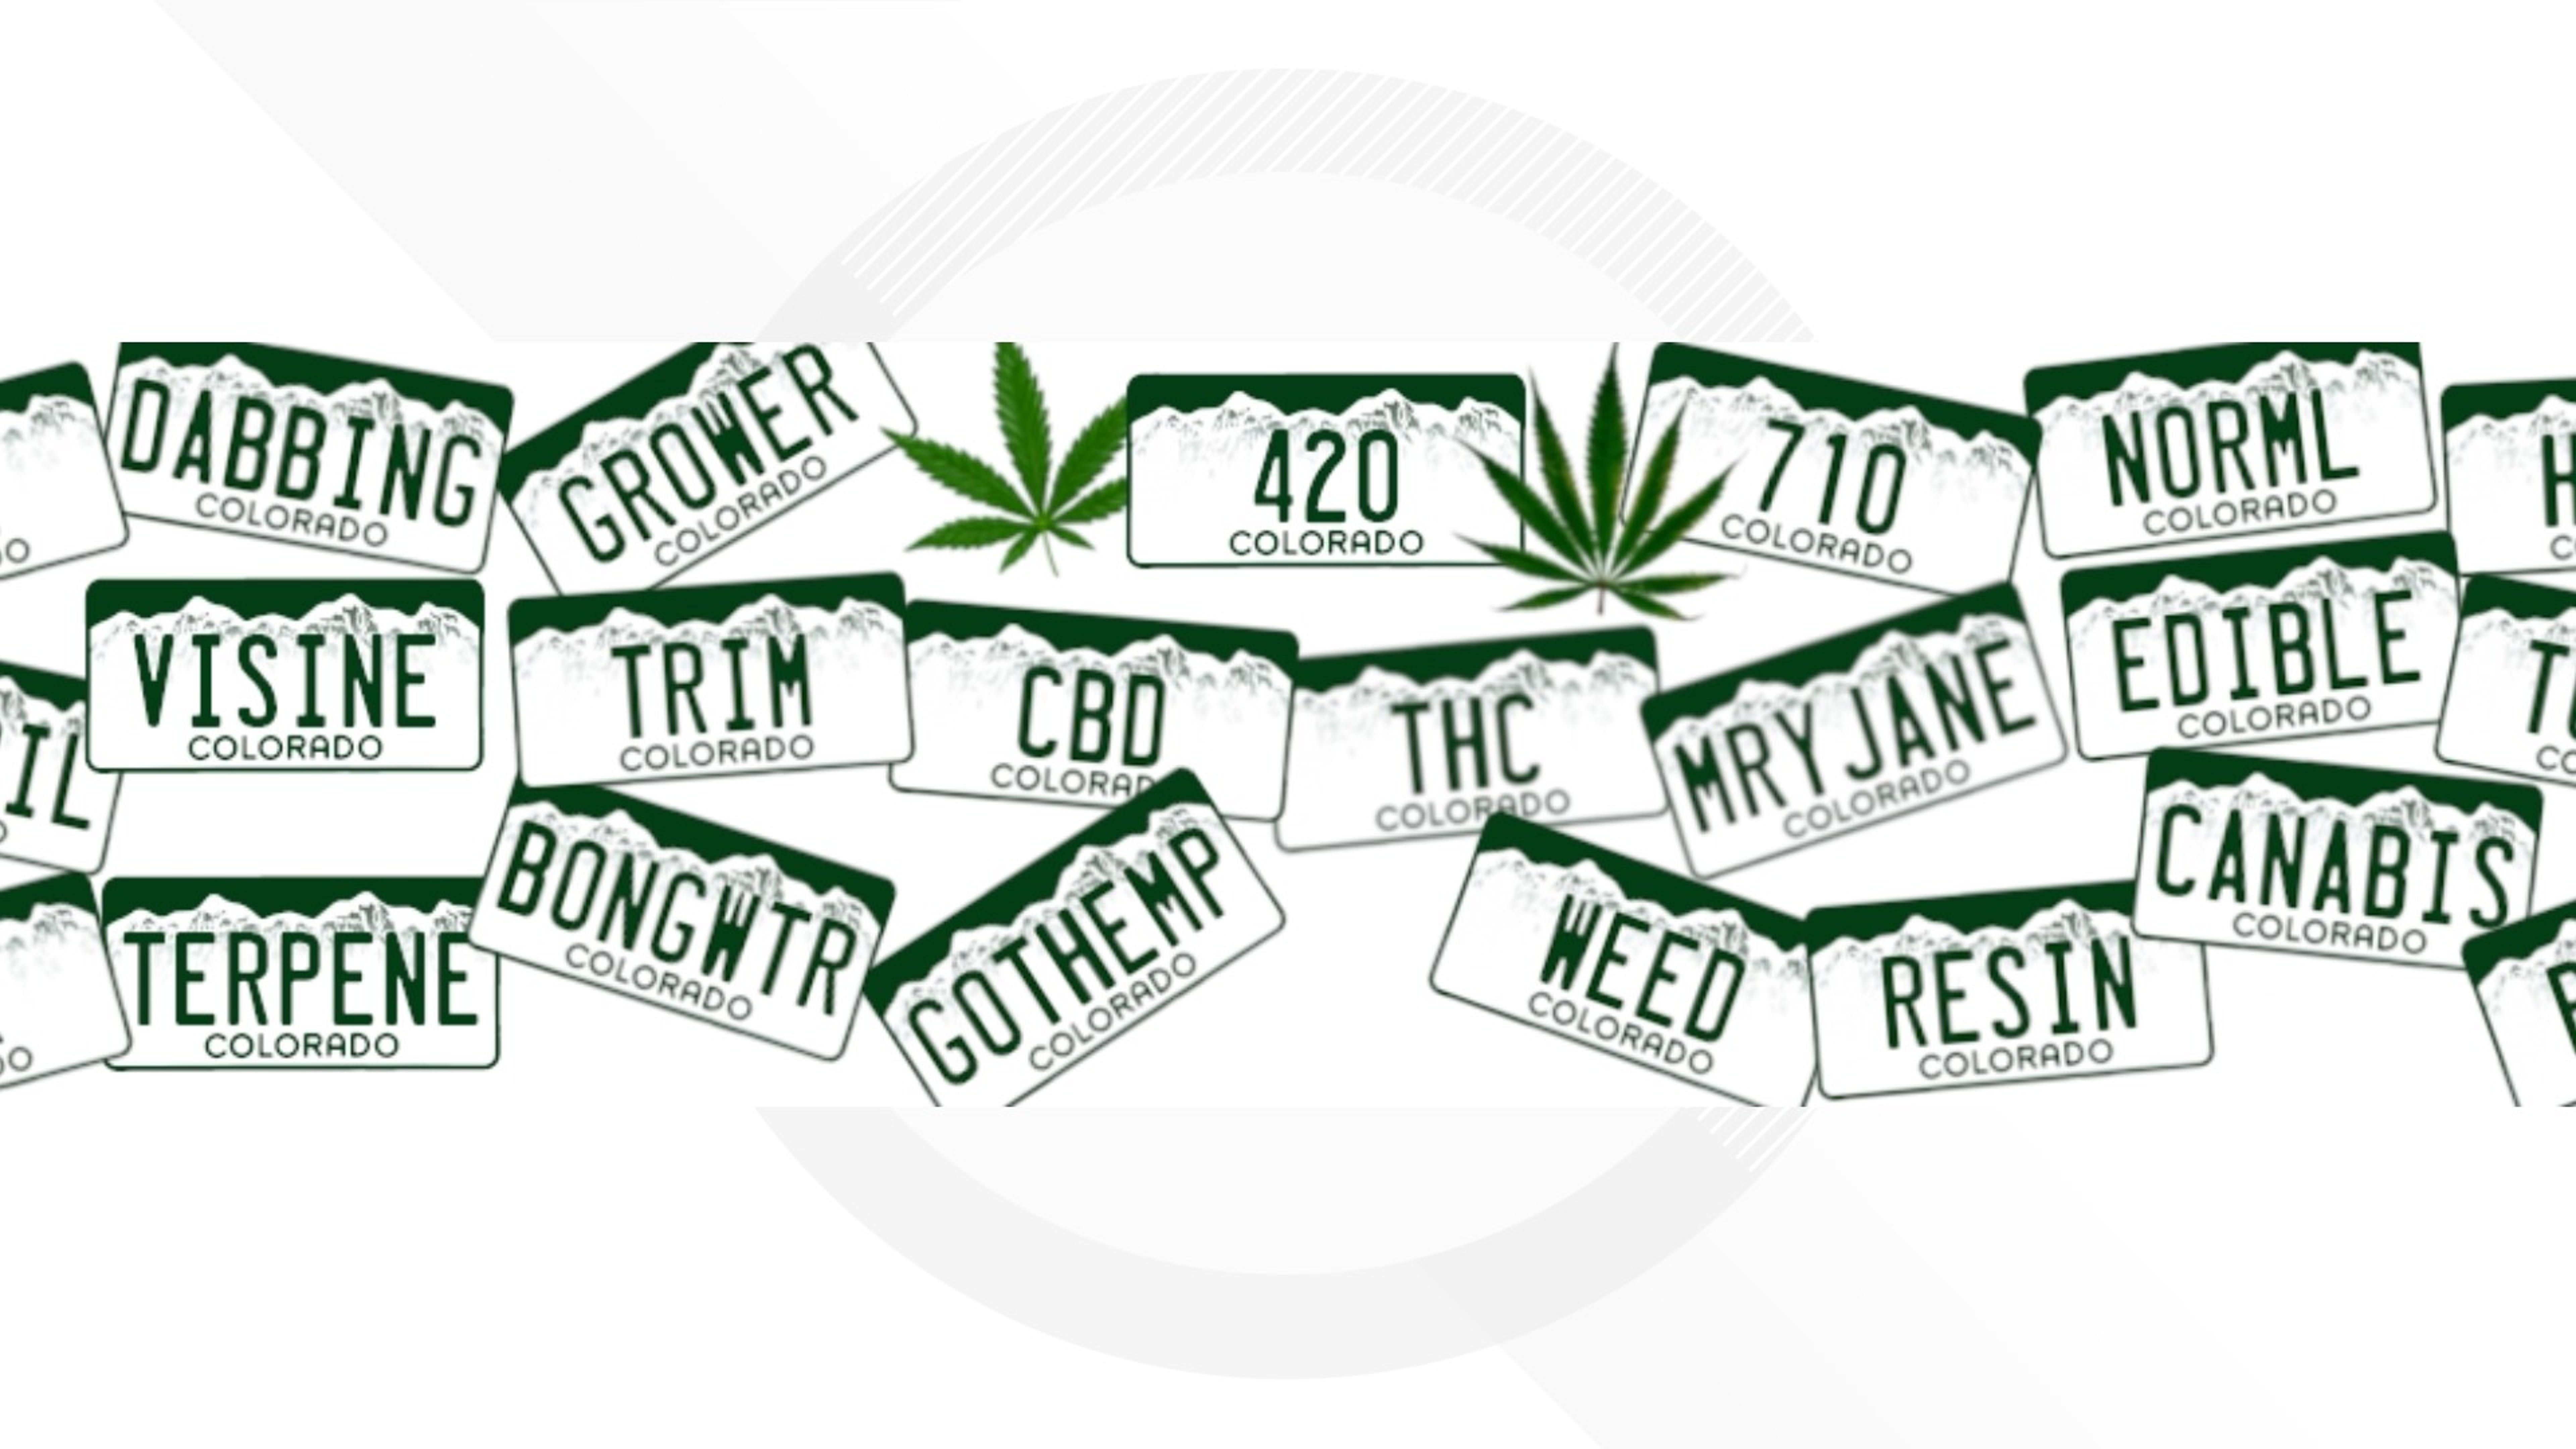 Cannabis-Themed License Plates Up For Auction In Colorado, Bidding Open To All